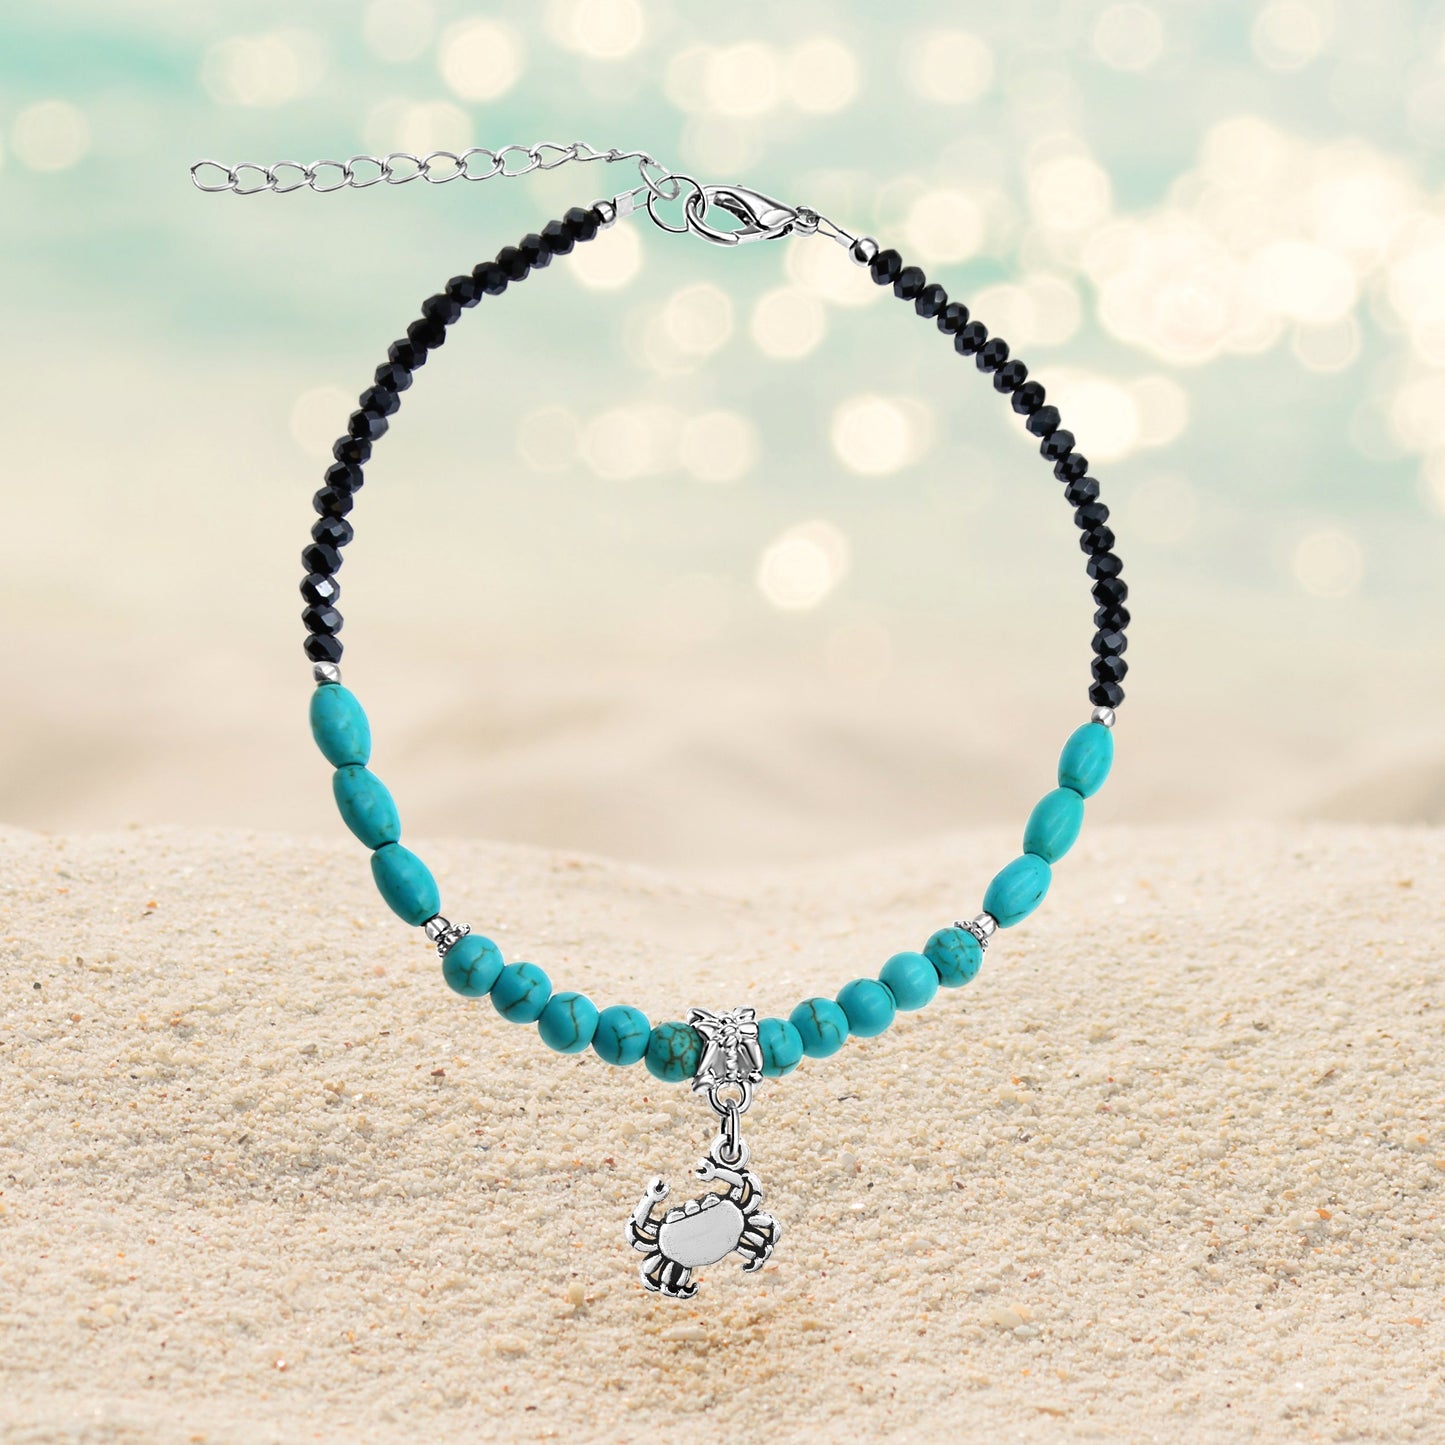 BESHEEK Crab BLUE and BLACK Turquoise Stone Artisan Beaded Anklet with Extension | Handmade Hypoallergenic Beach Gala Wedding Style Jewelry